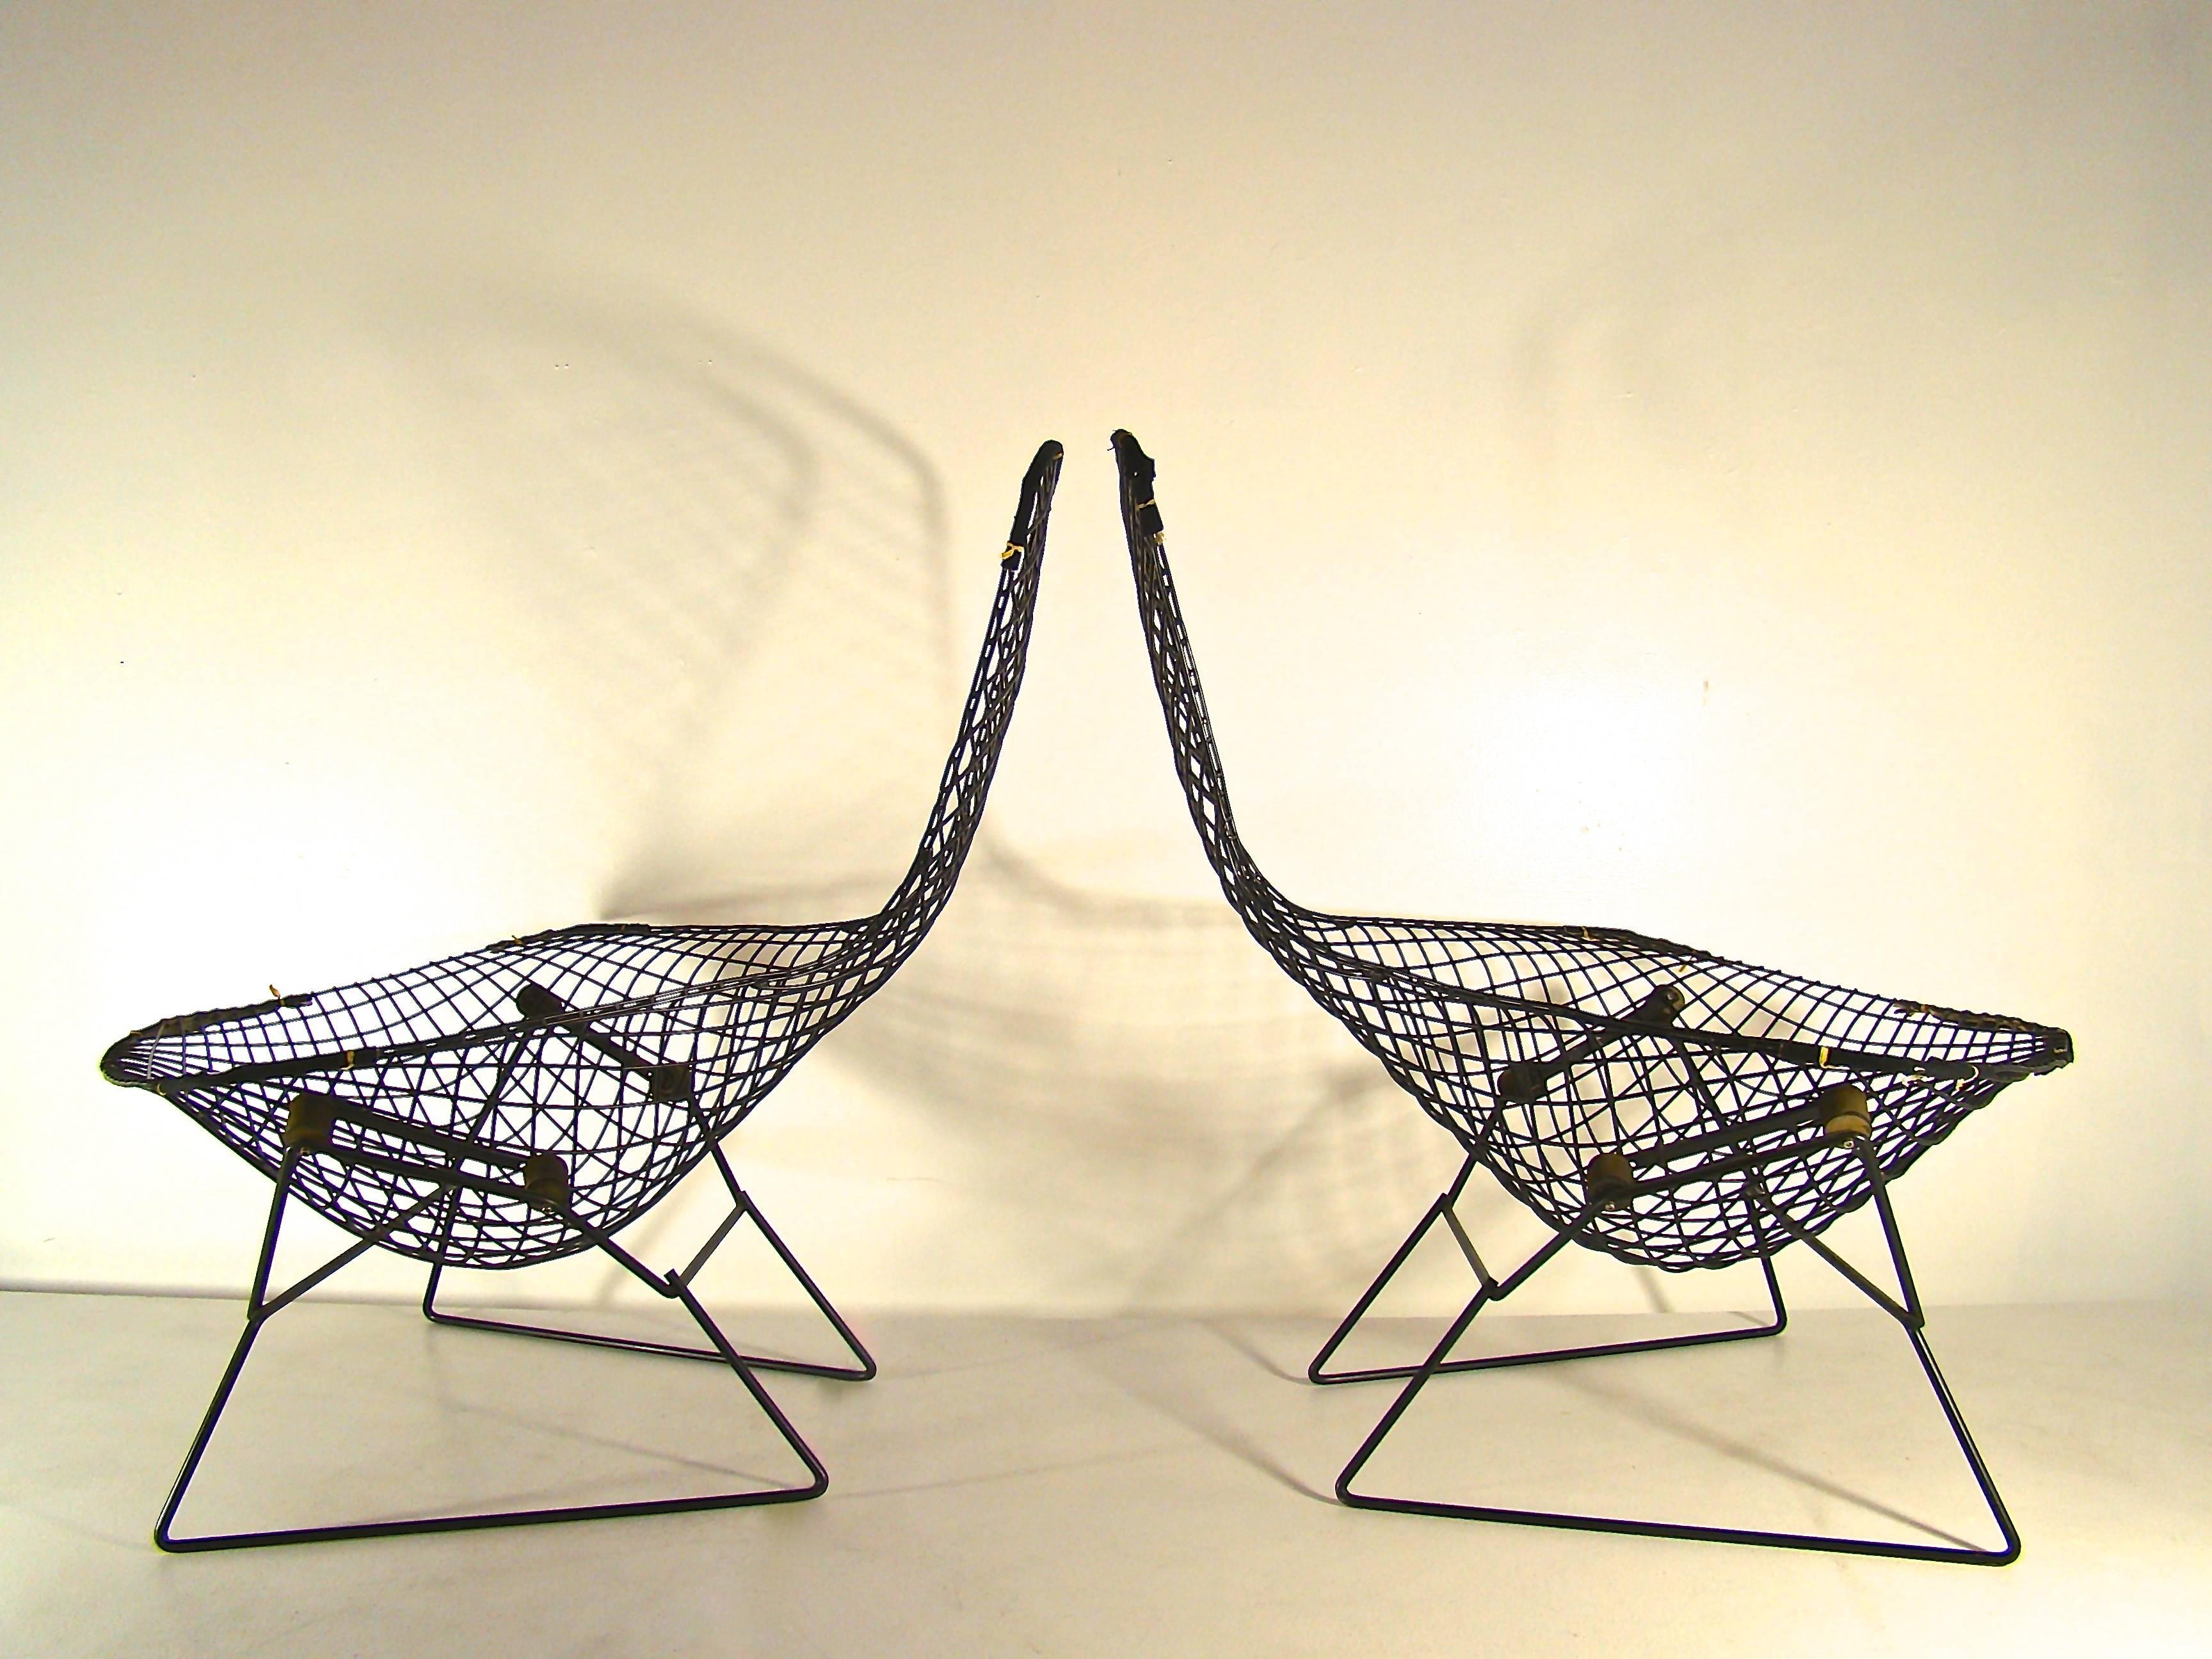 Beautiful and iconic chairs by Harry Bertoia in black finish welded steel. The chair is not only beautiful but extremely comfortable. Both of these chairs have been cared for extremely well and are in all excellent original condition. They are solid